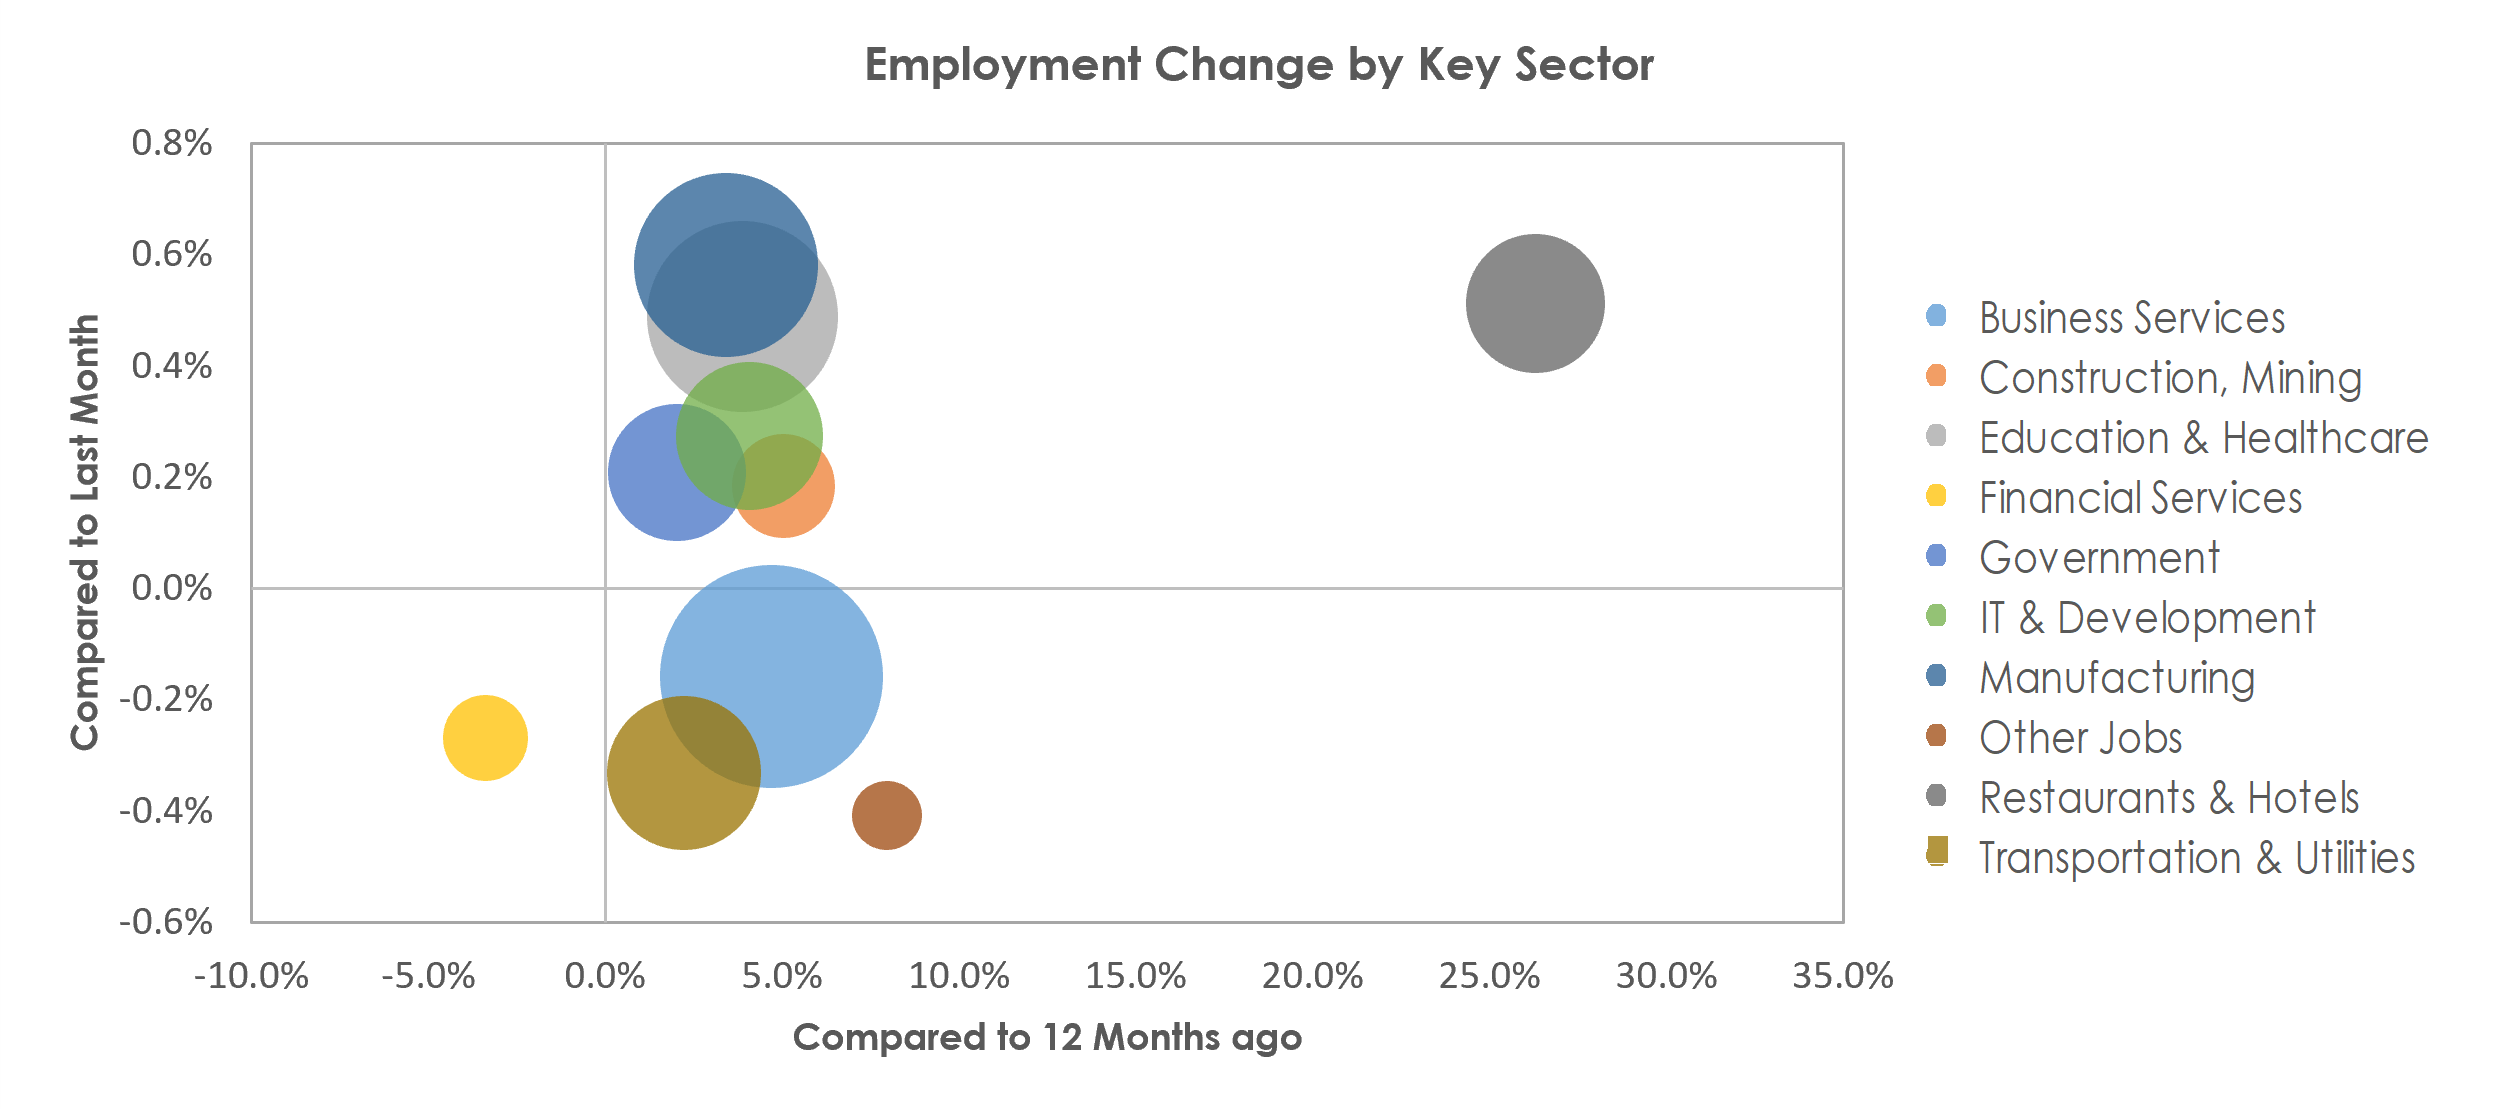 San Jose-Sunnyvale-Santa Clara, CA Unemployment by Industry May 2022